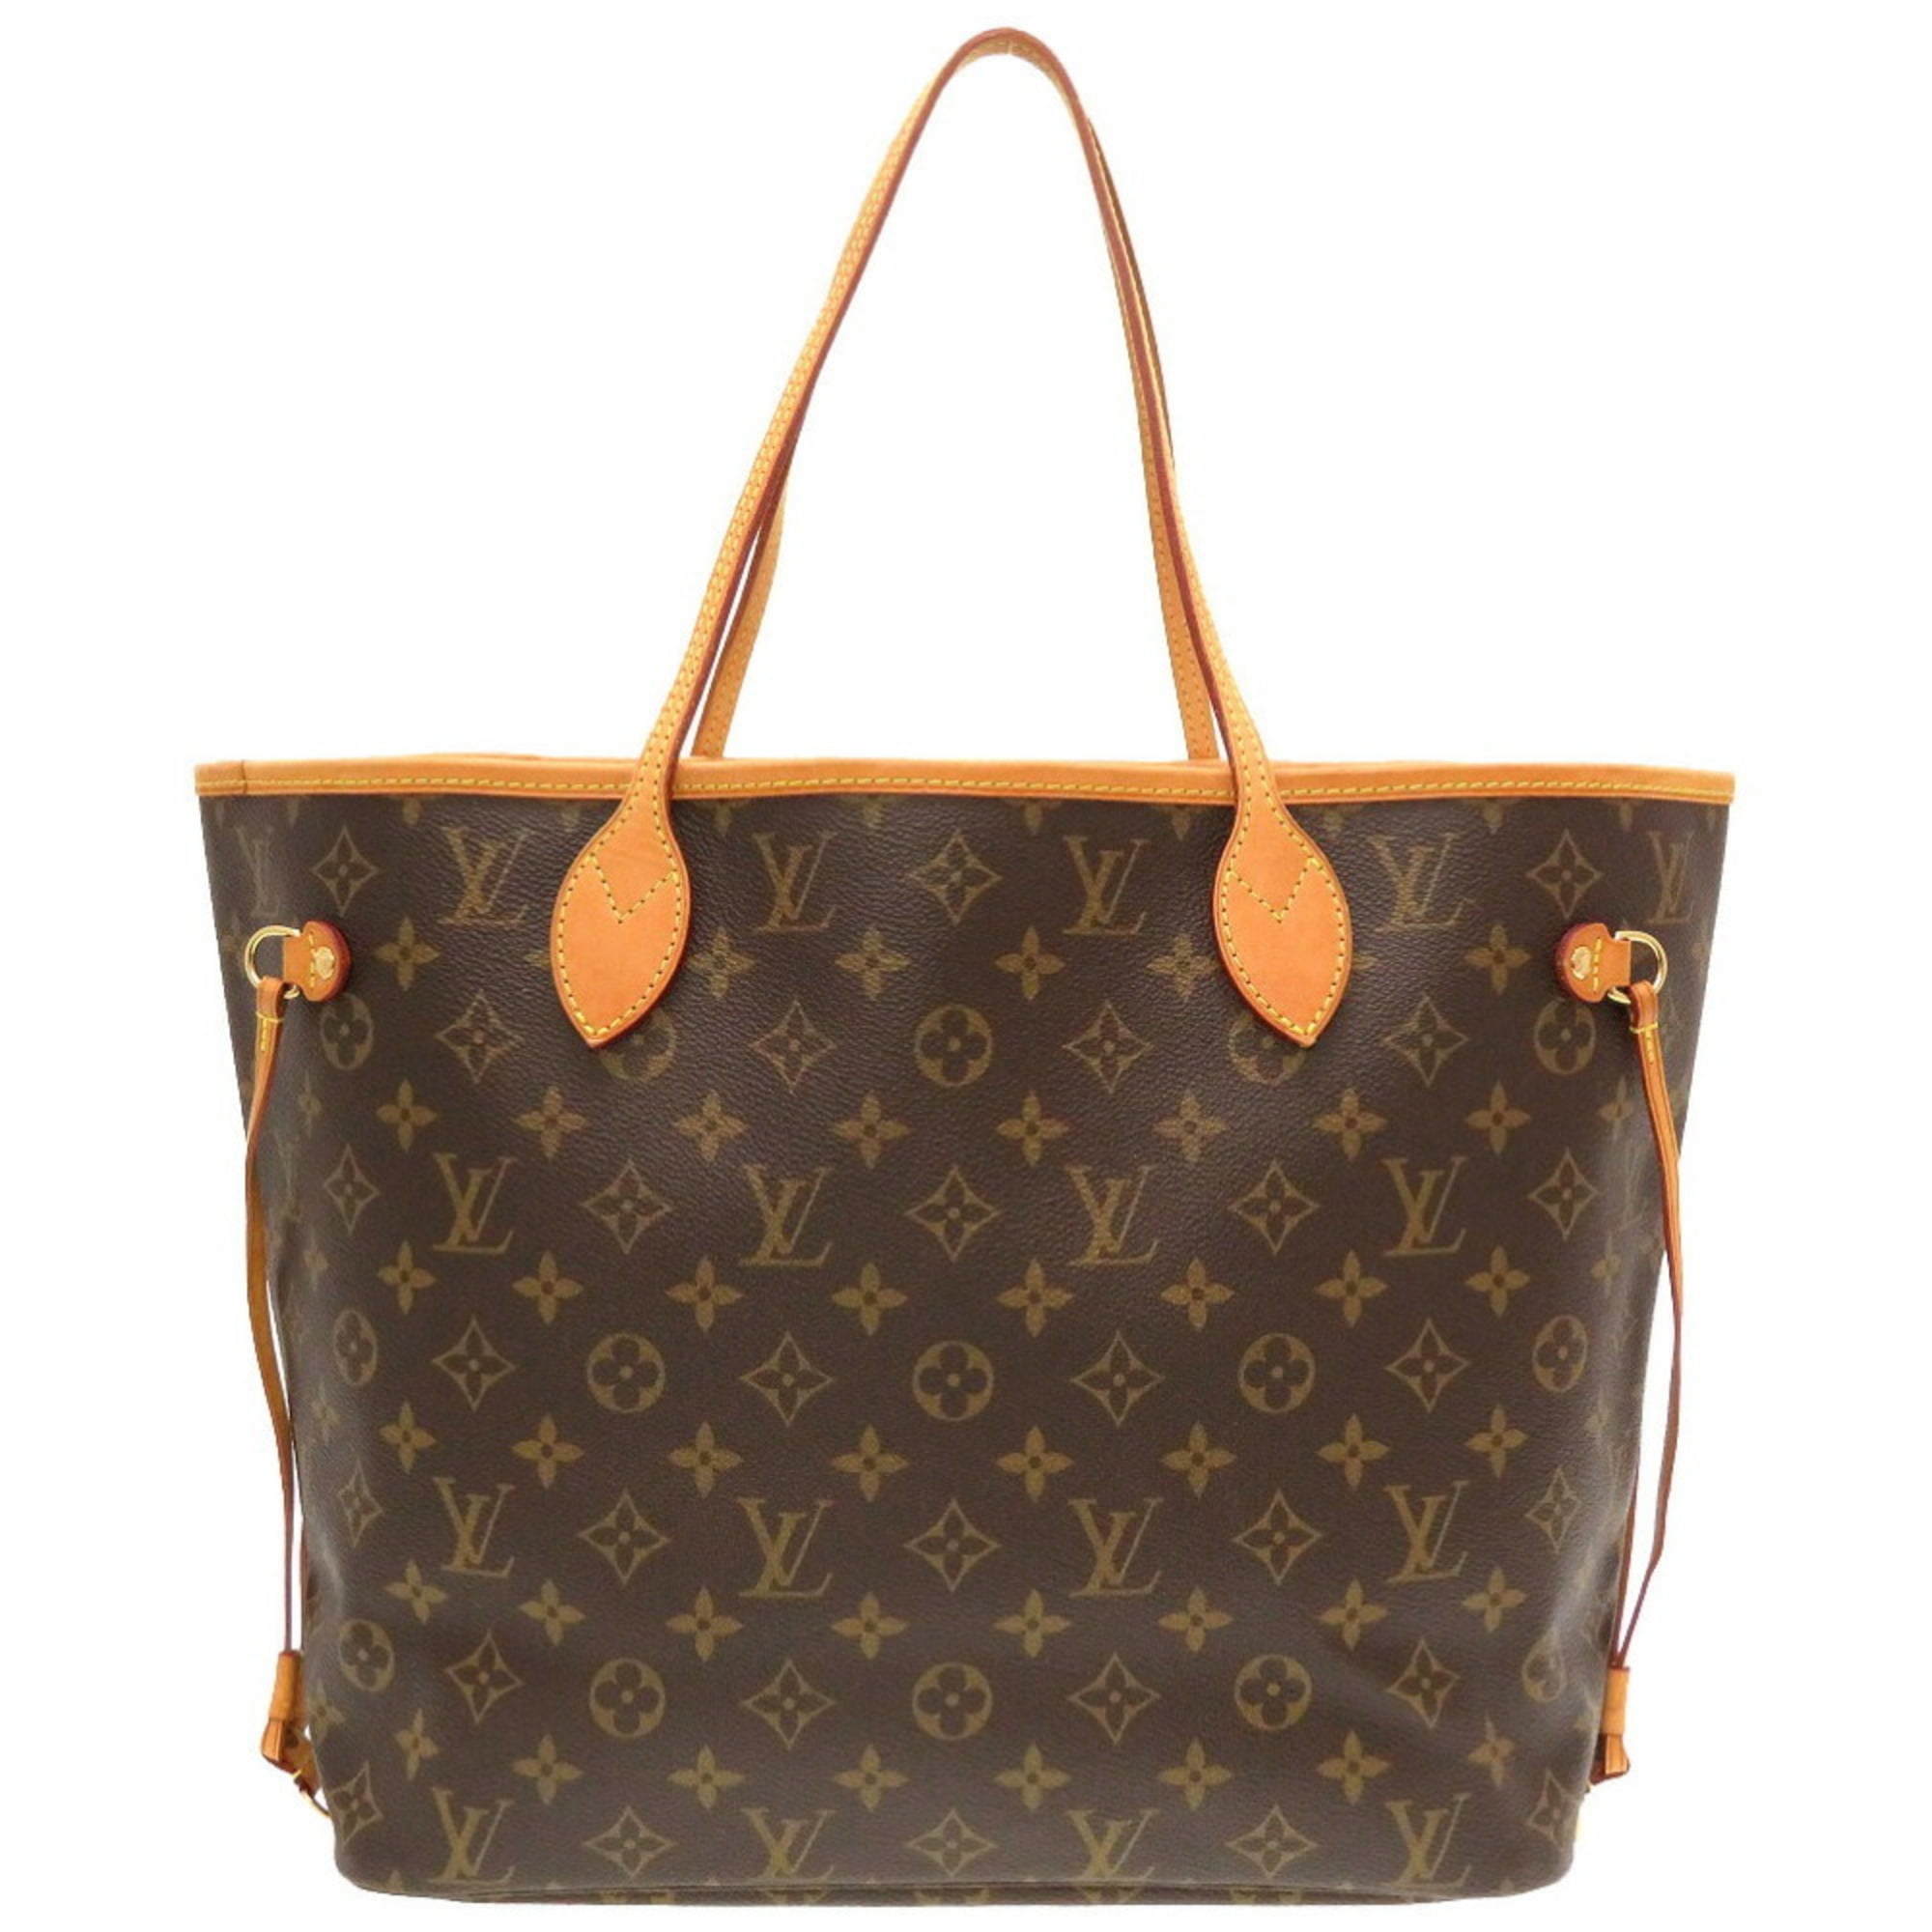 Authentic Second Hand Louis Vuitton Mahina Perforated Monogram Shoulder Bag  PSS06500051  THE FIFTH COLLECTION